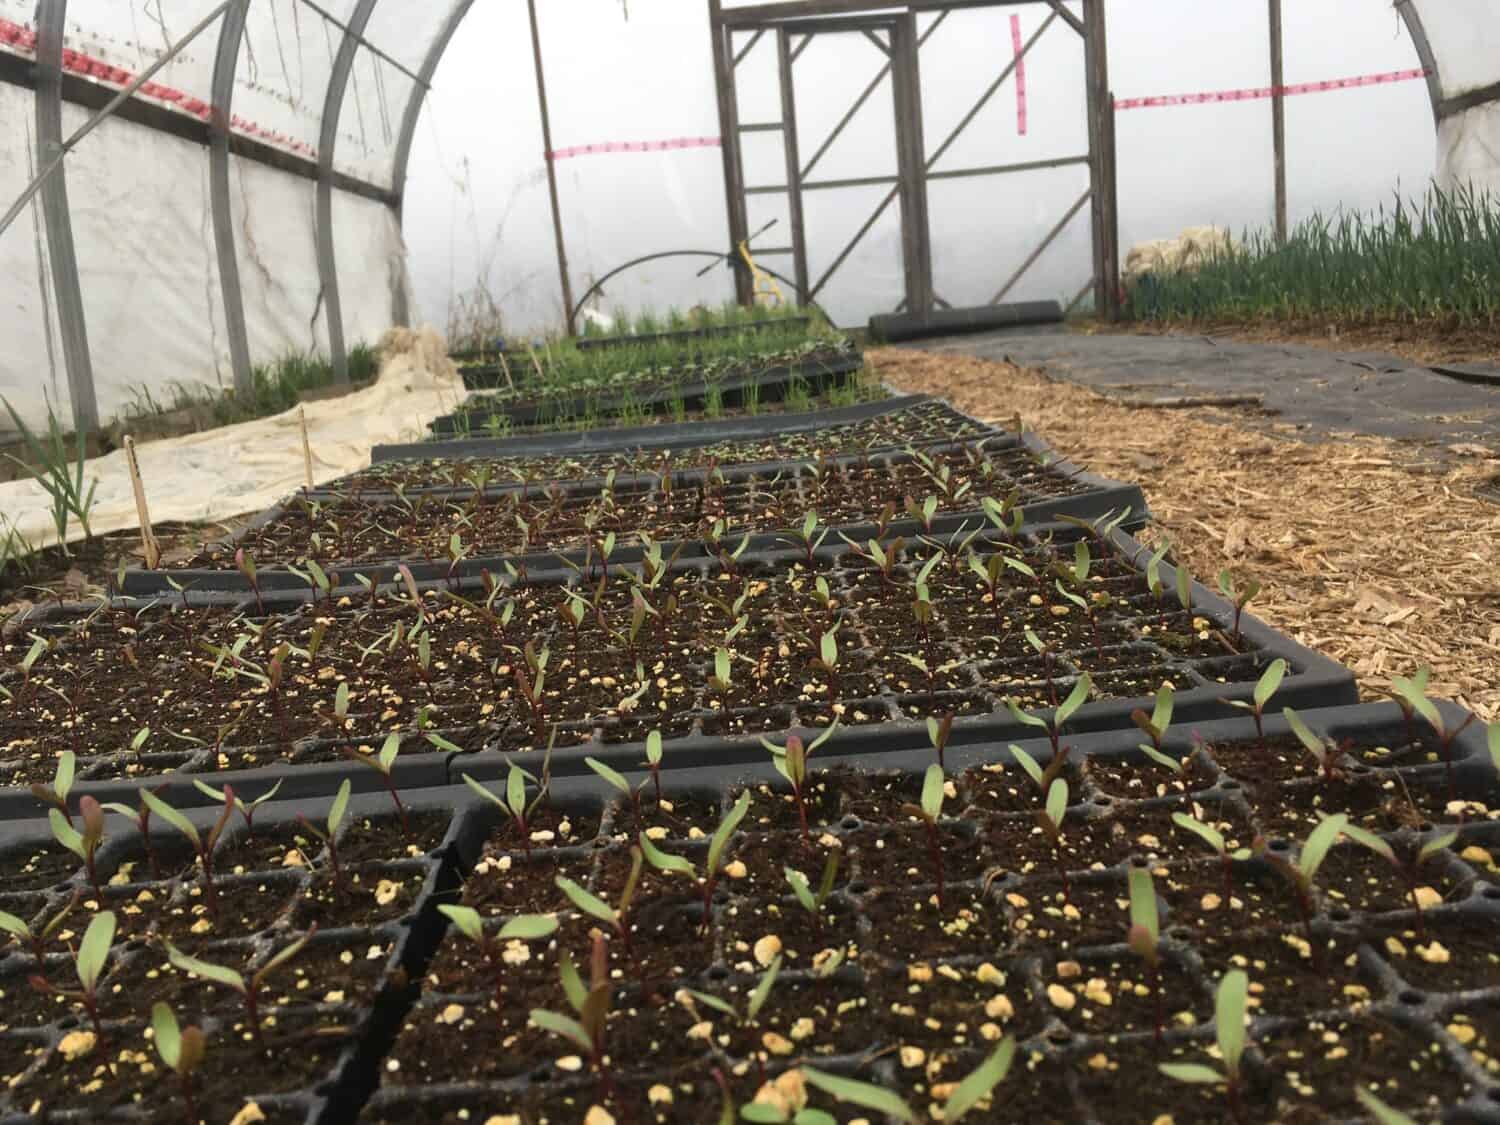 Seedlings in the Greenhouse - April Showers Upon Showers